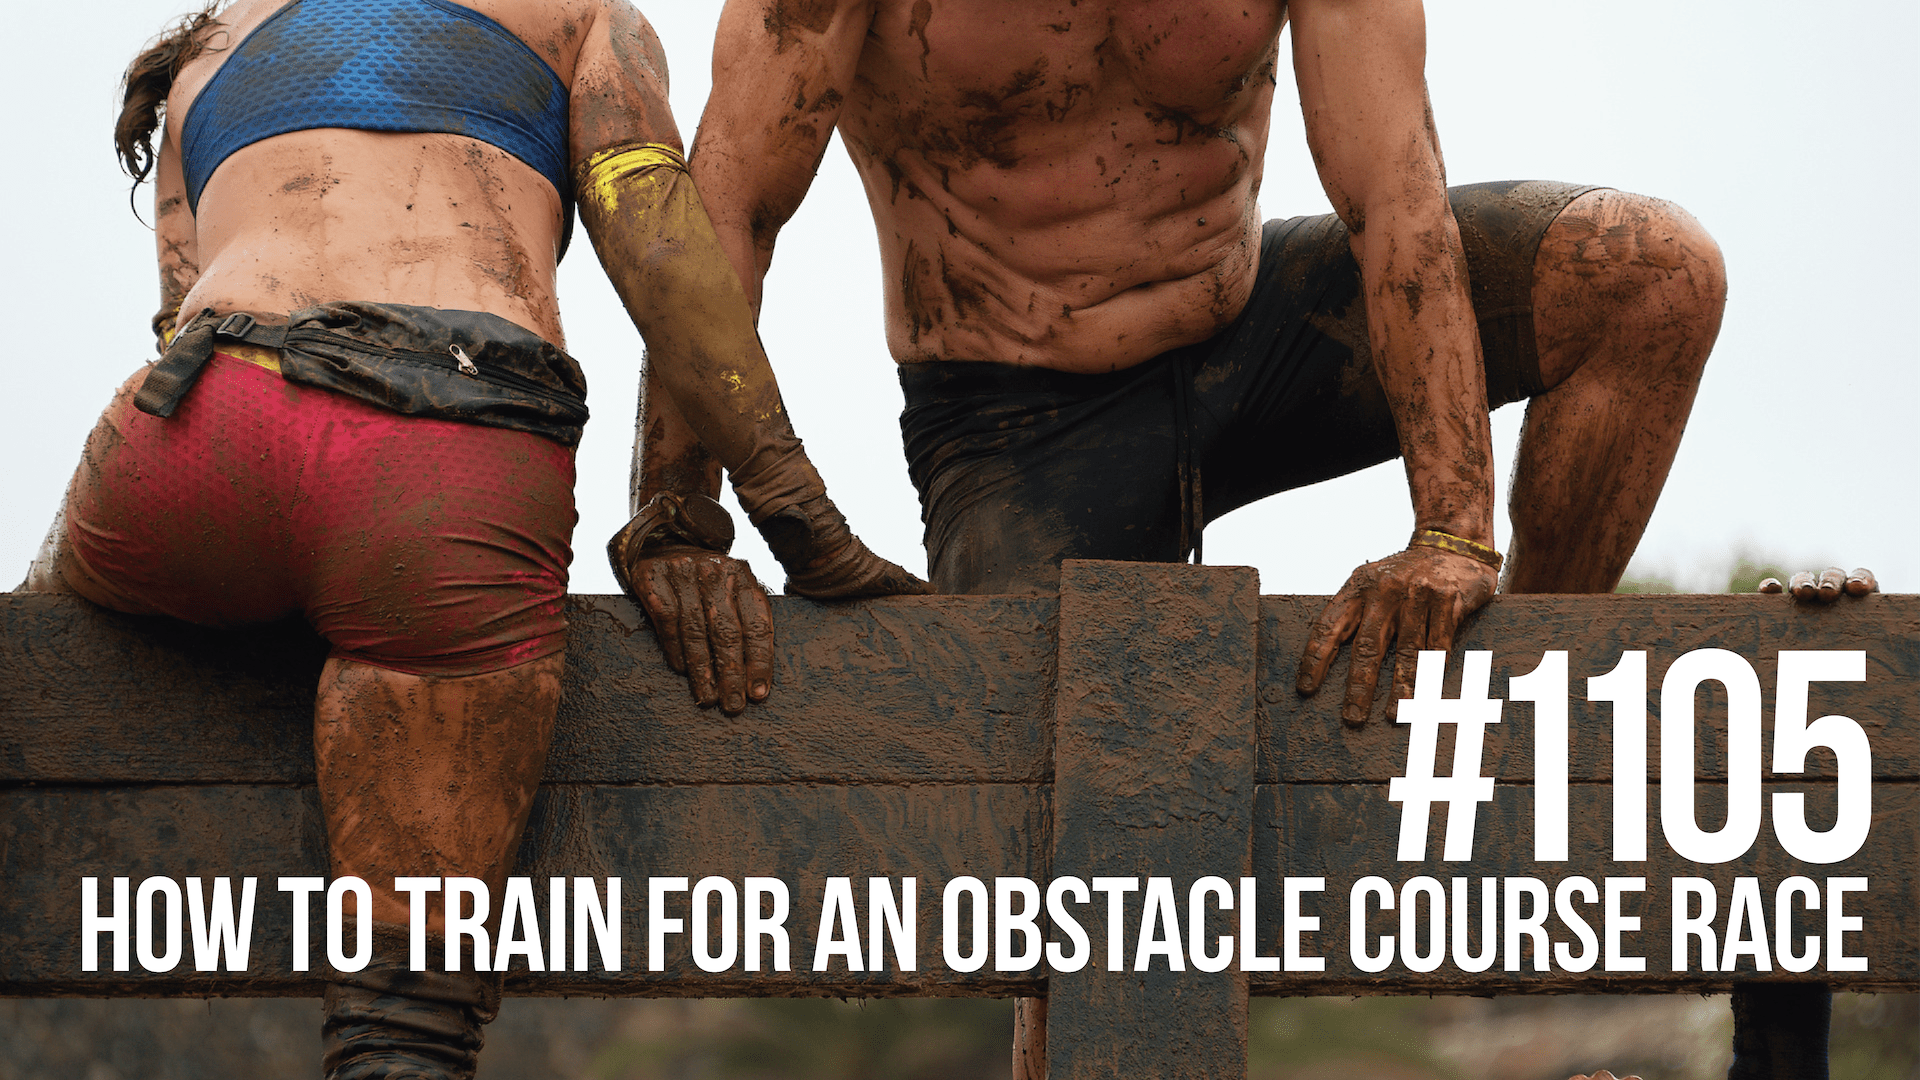 1105: How to Train for an Obstacle Course Race